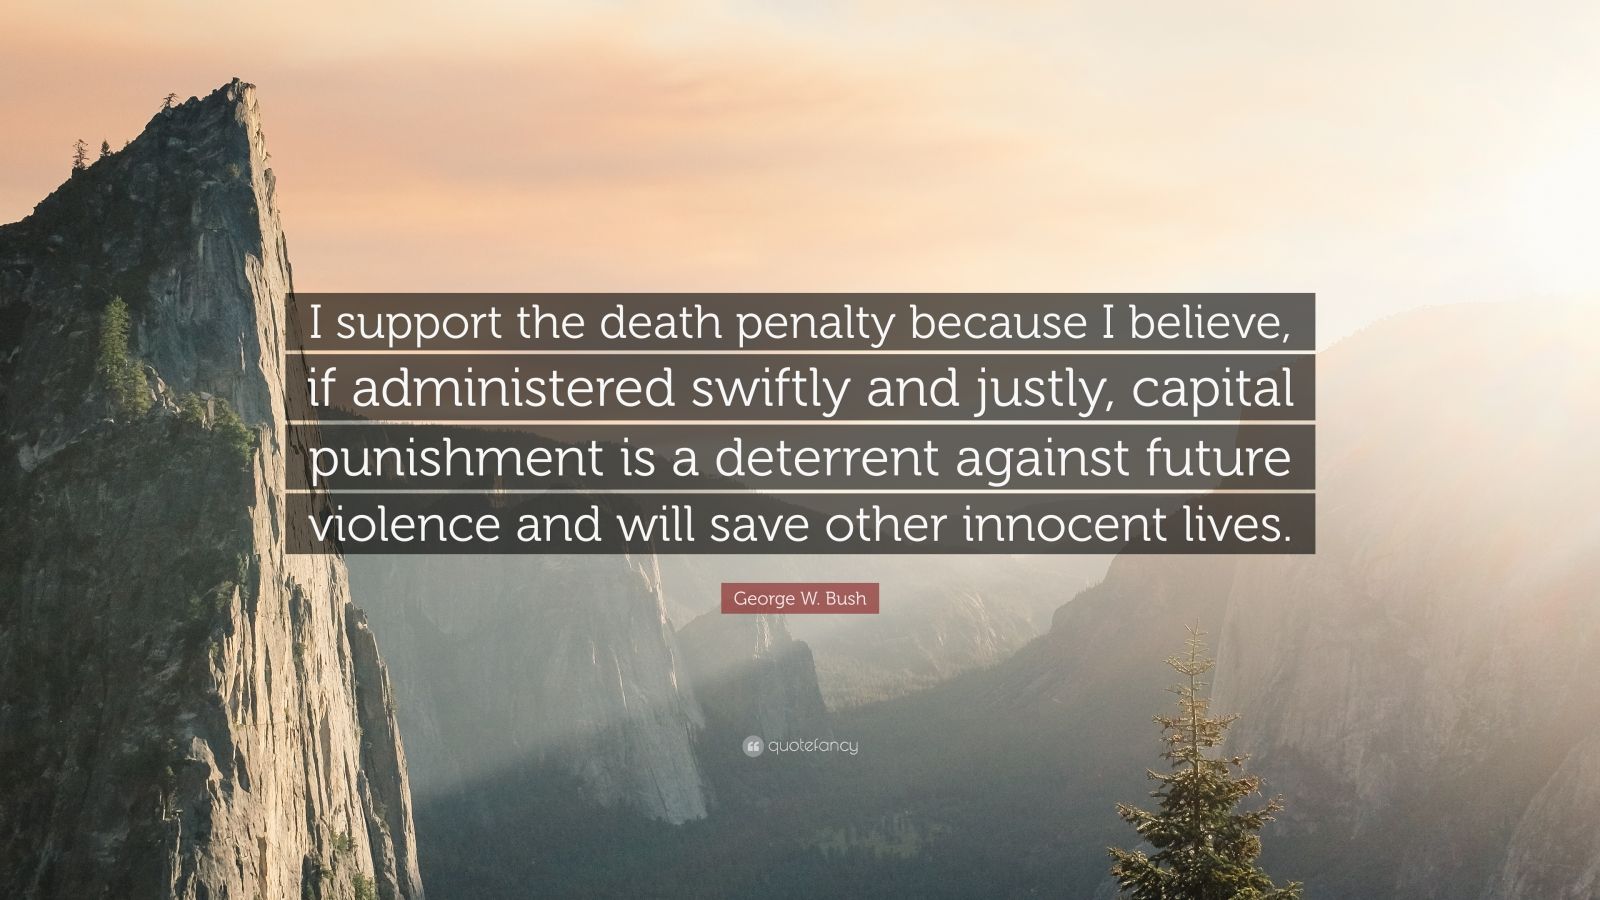 George W. Bush Quote: “I support the death penalty because I believe